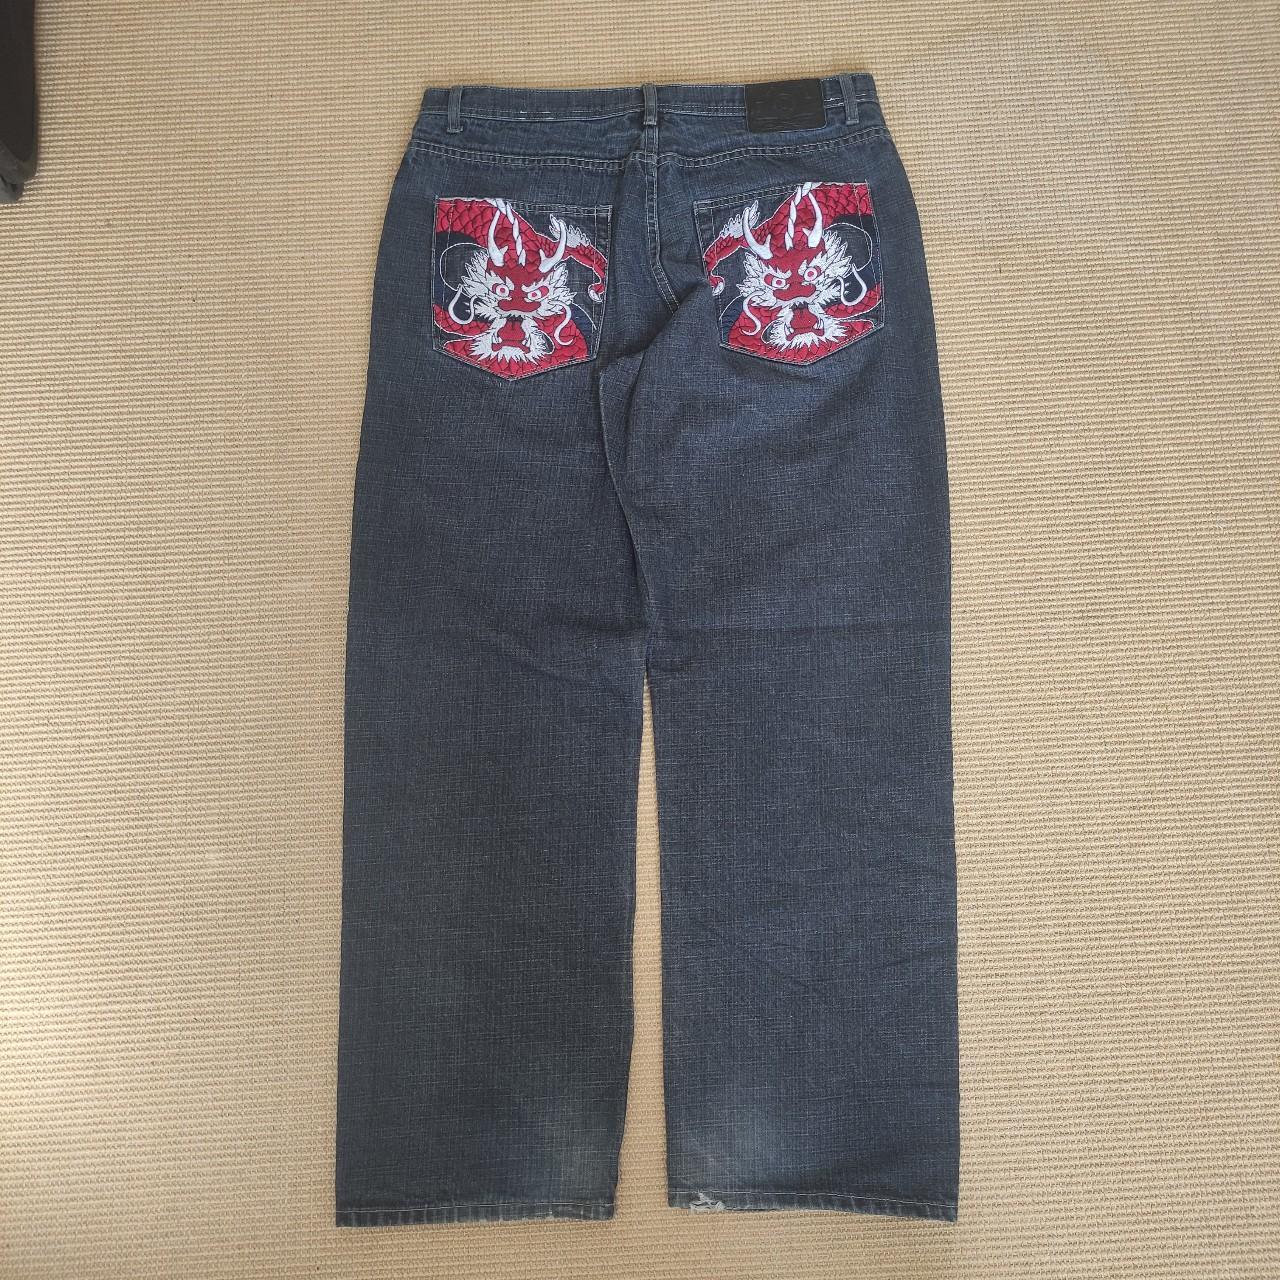 g unit embroidered baggy jeans red dragon pattern... - Depop